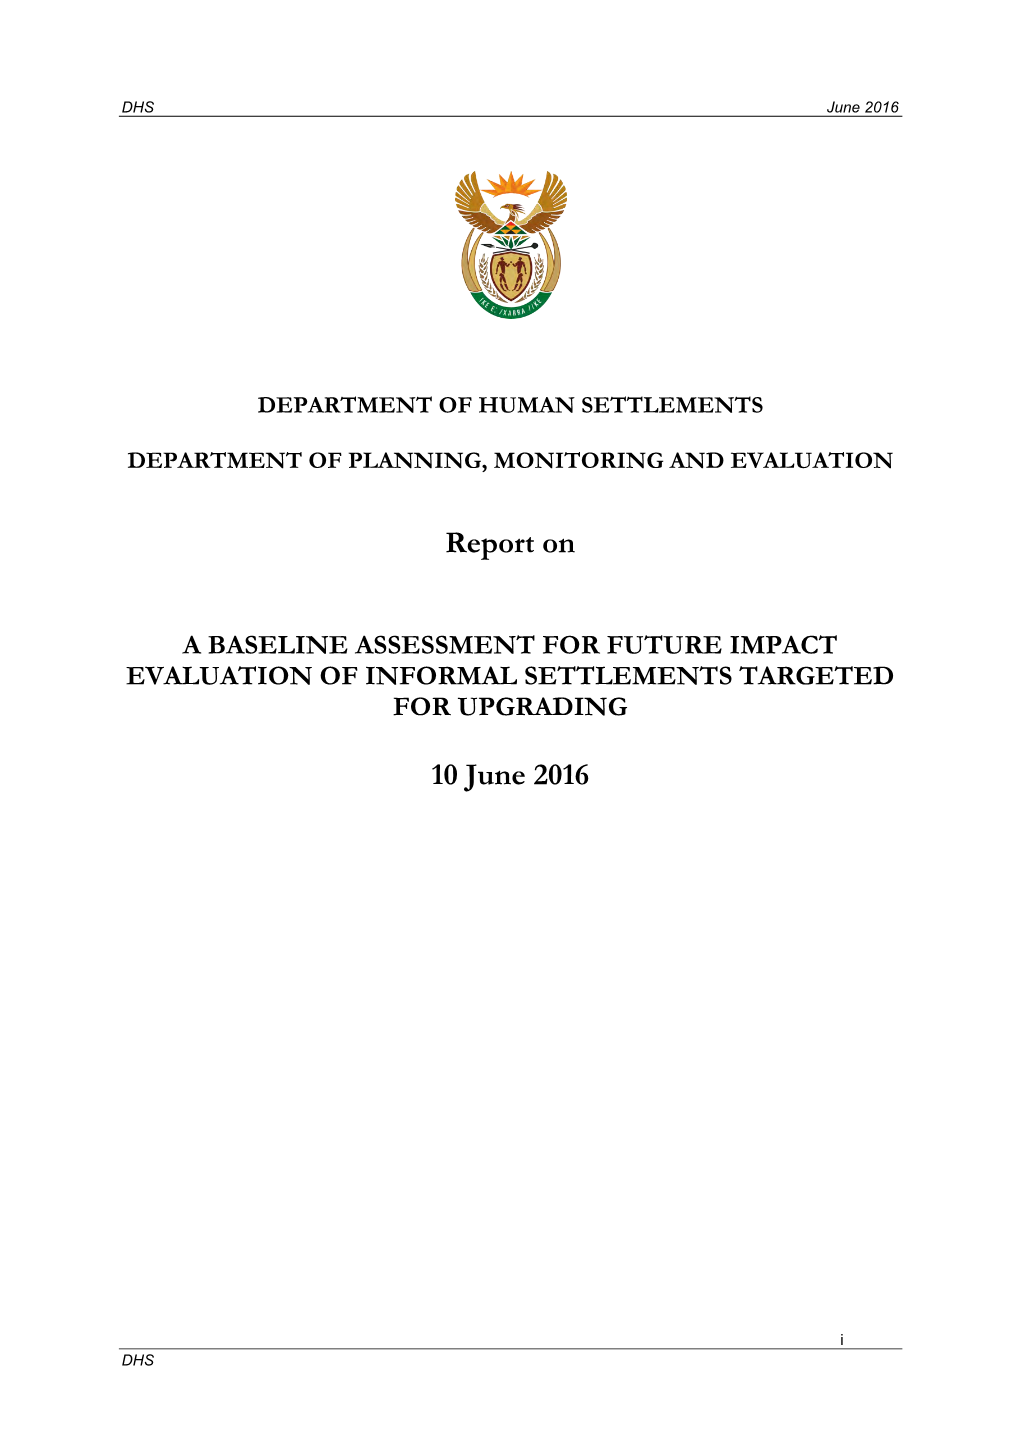 Main Report on a Baseline Study for Future Impact Evaluation of Informal